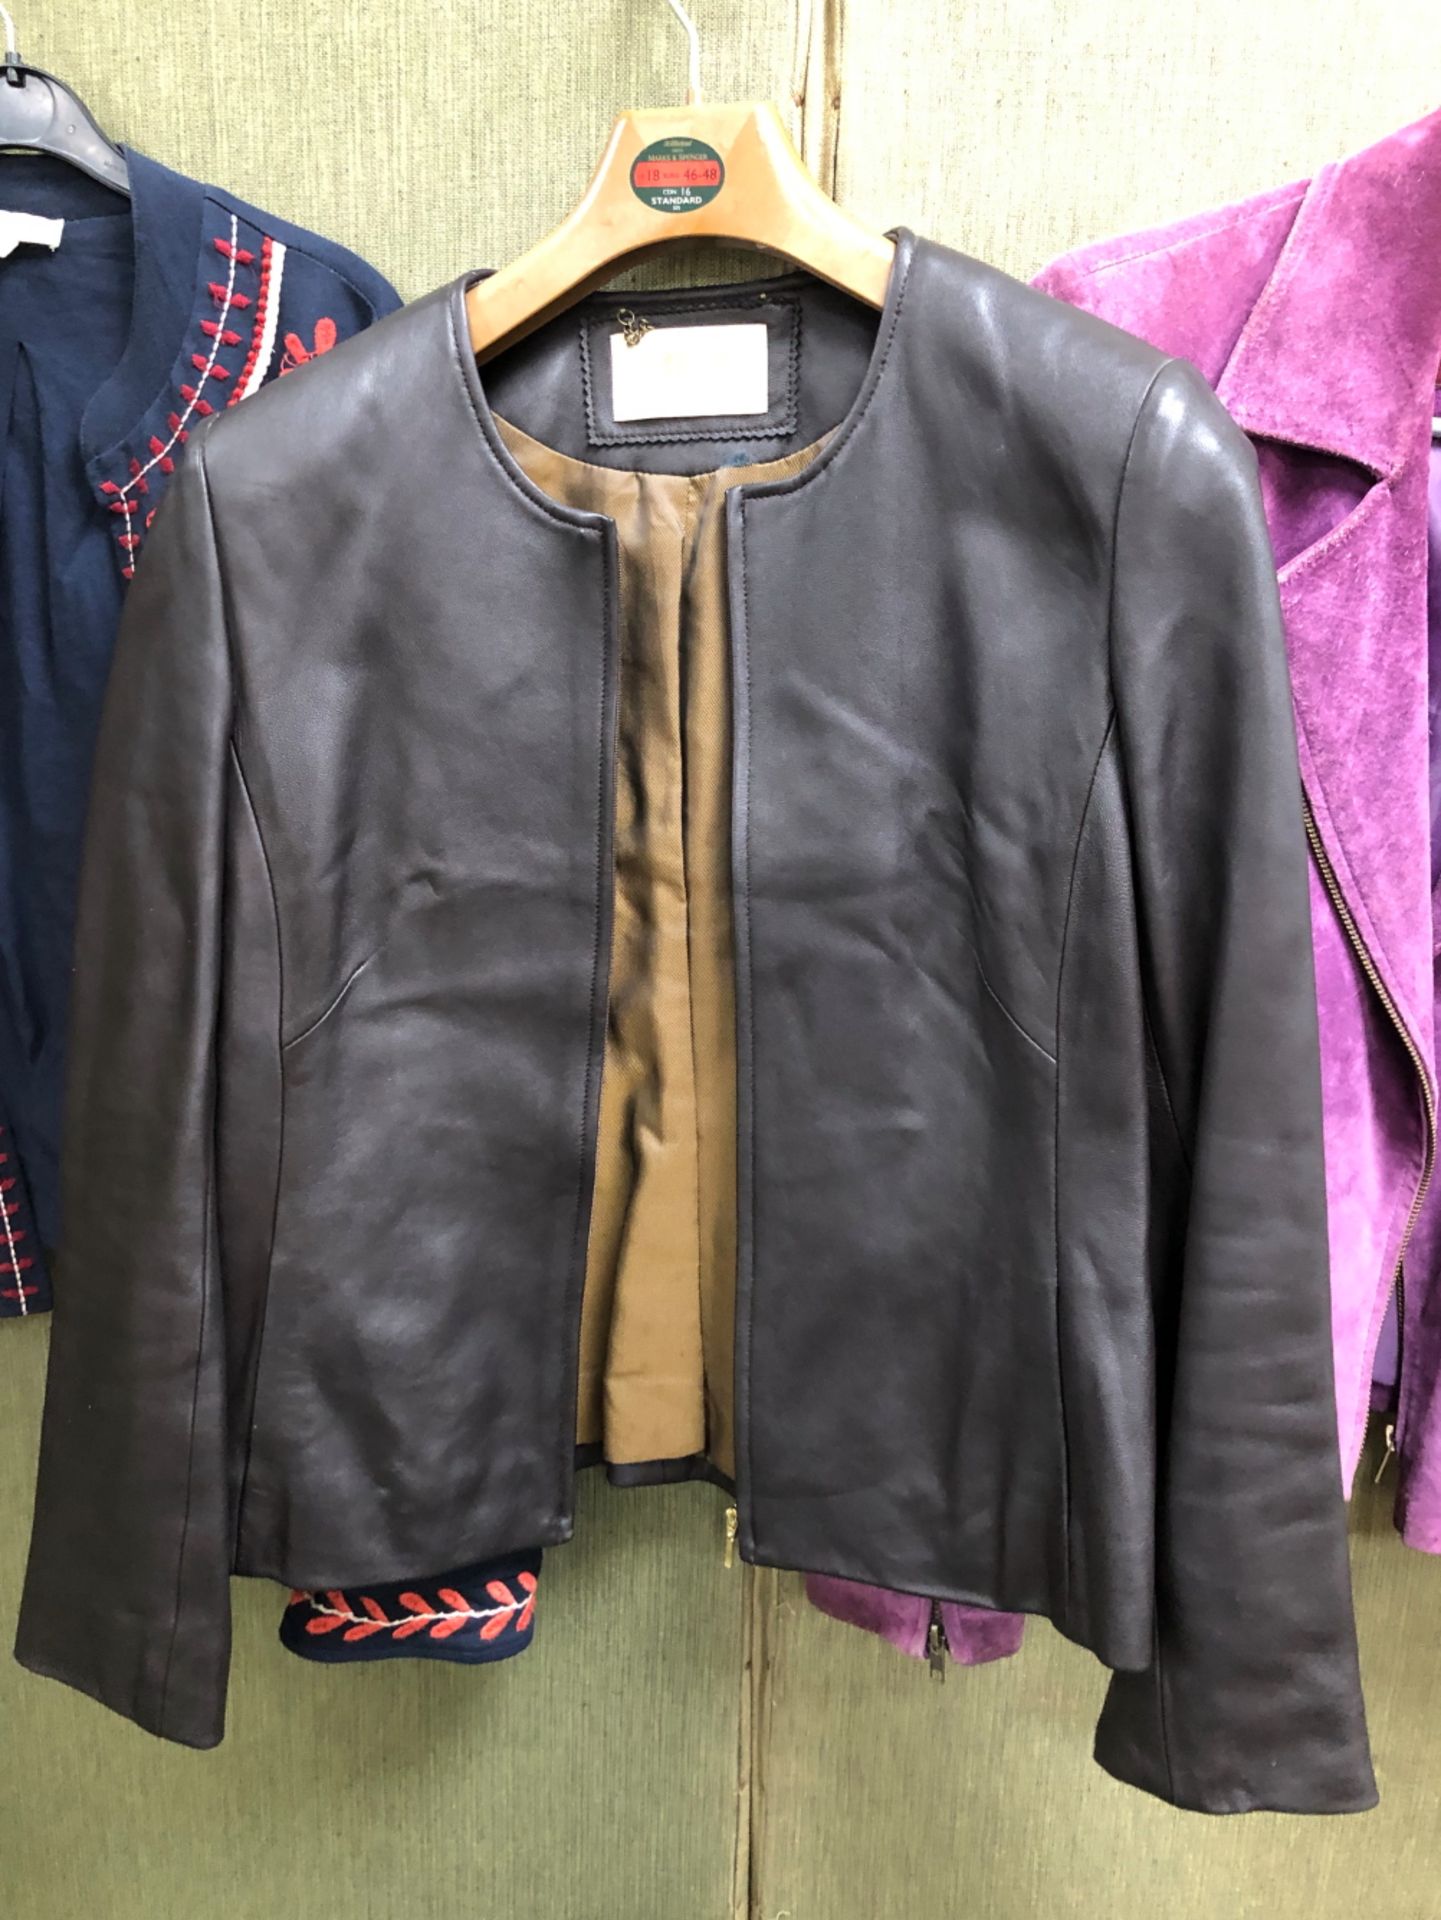 JACKETS. A SECOND SKIN PURPLE SUEDE JACKET SIZE 12, TOGETHER WITH A DARK BROWN COUNTRY CASUALS - Image 4 of 10